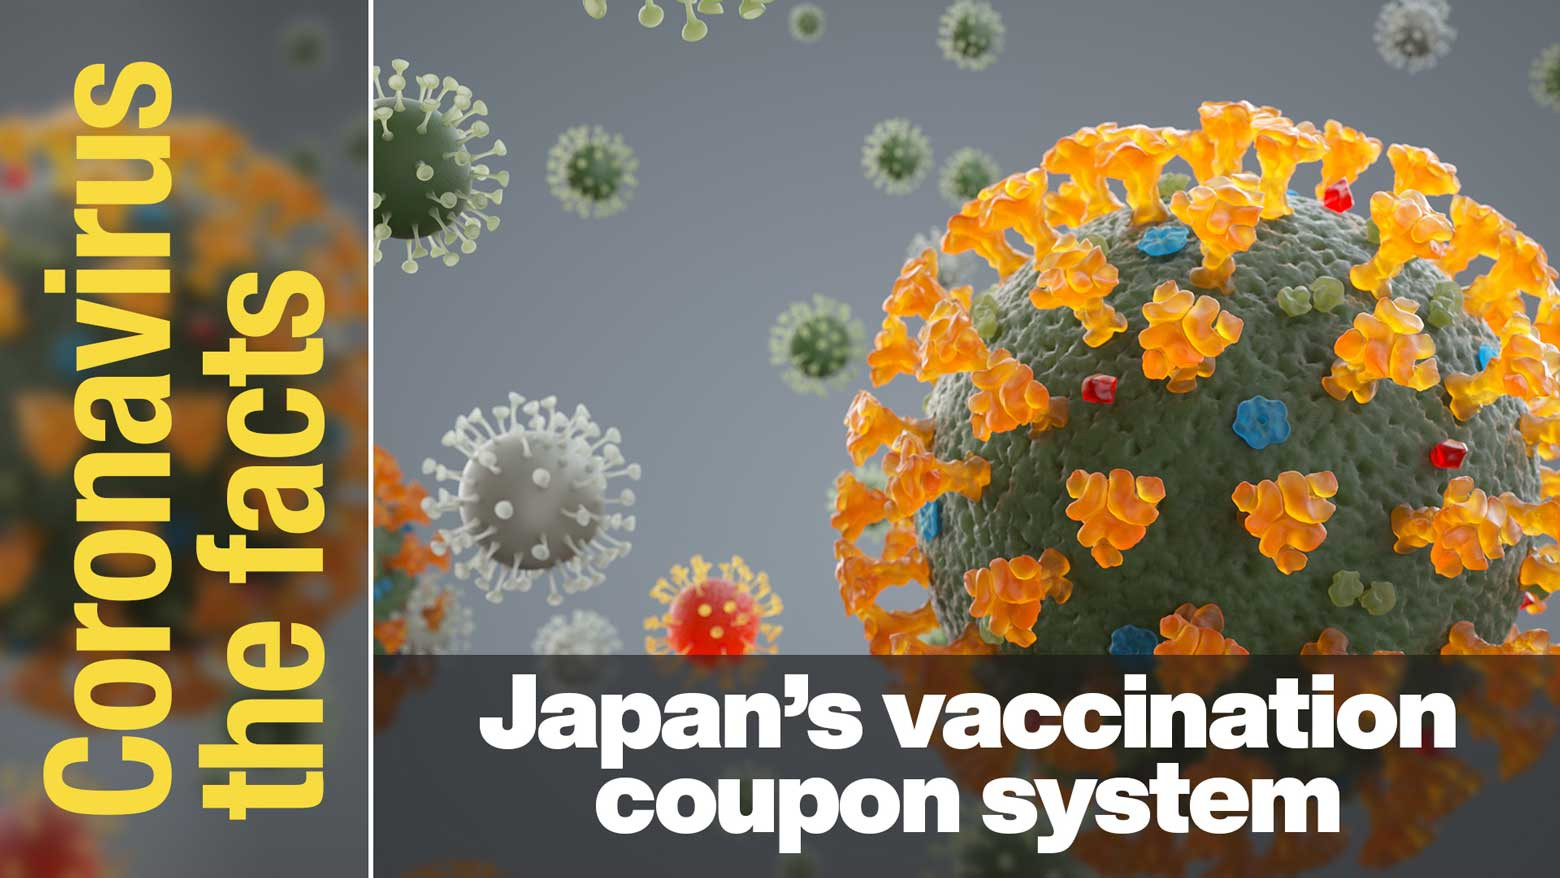 Coupons are required for coronavirus vaccination in Japan